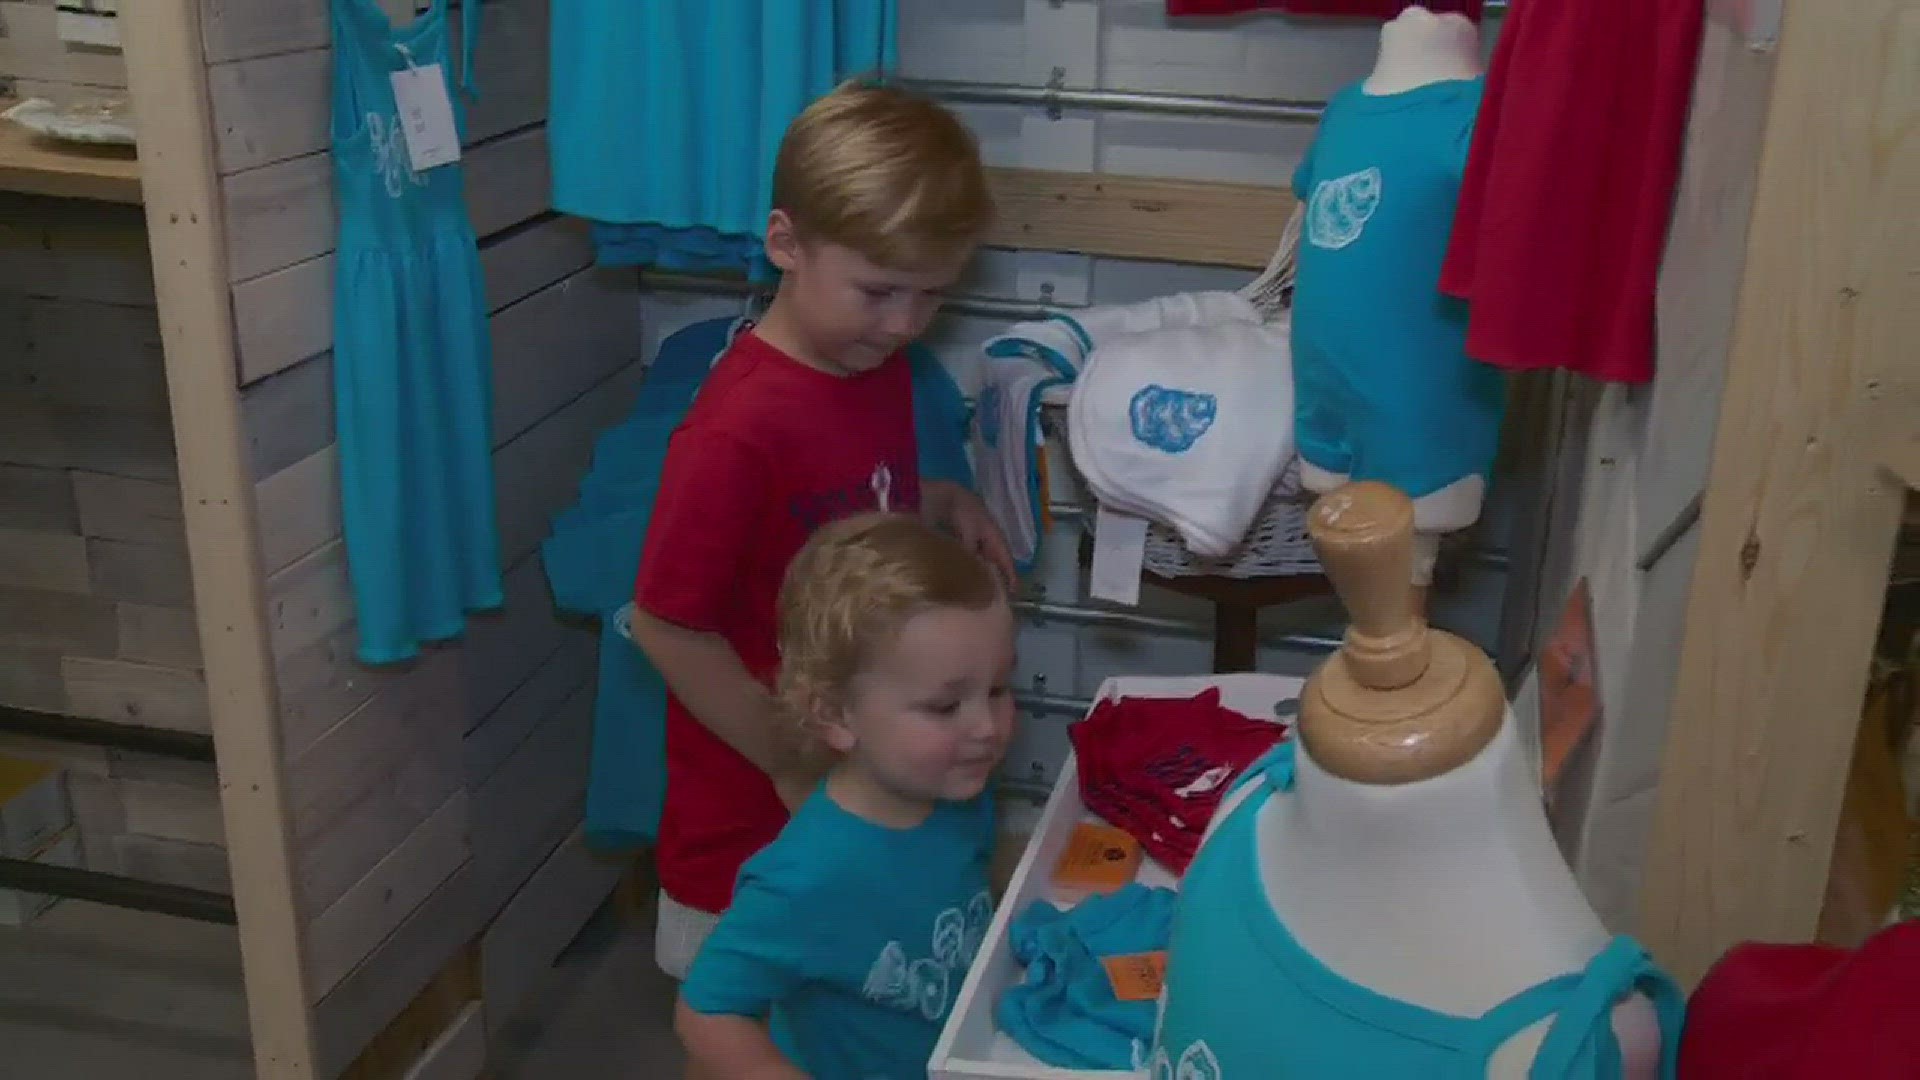 Bill Capo talks to a local businesswoman who changed the name of her children's clothing line after a trademark dispute.